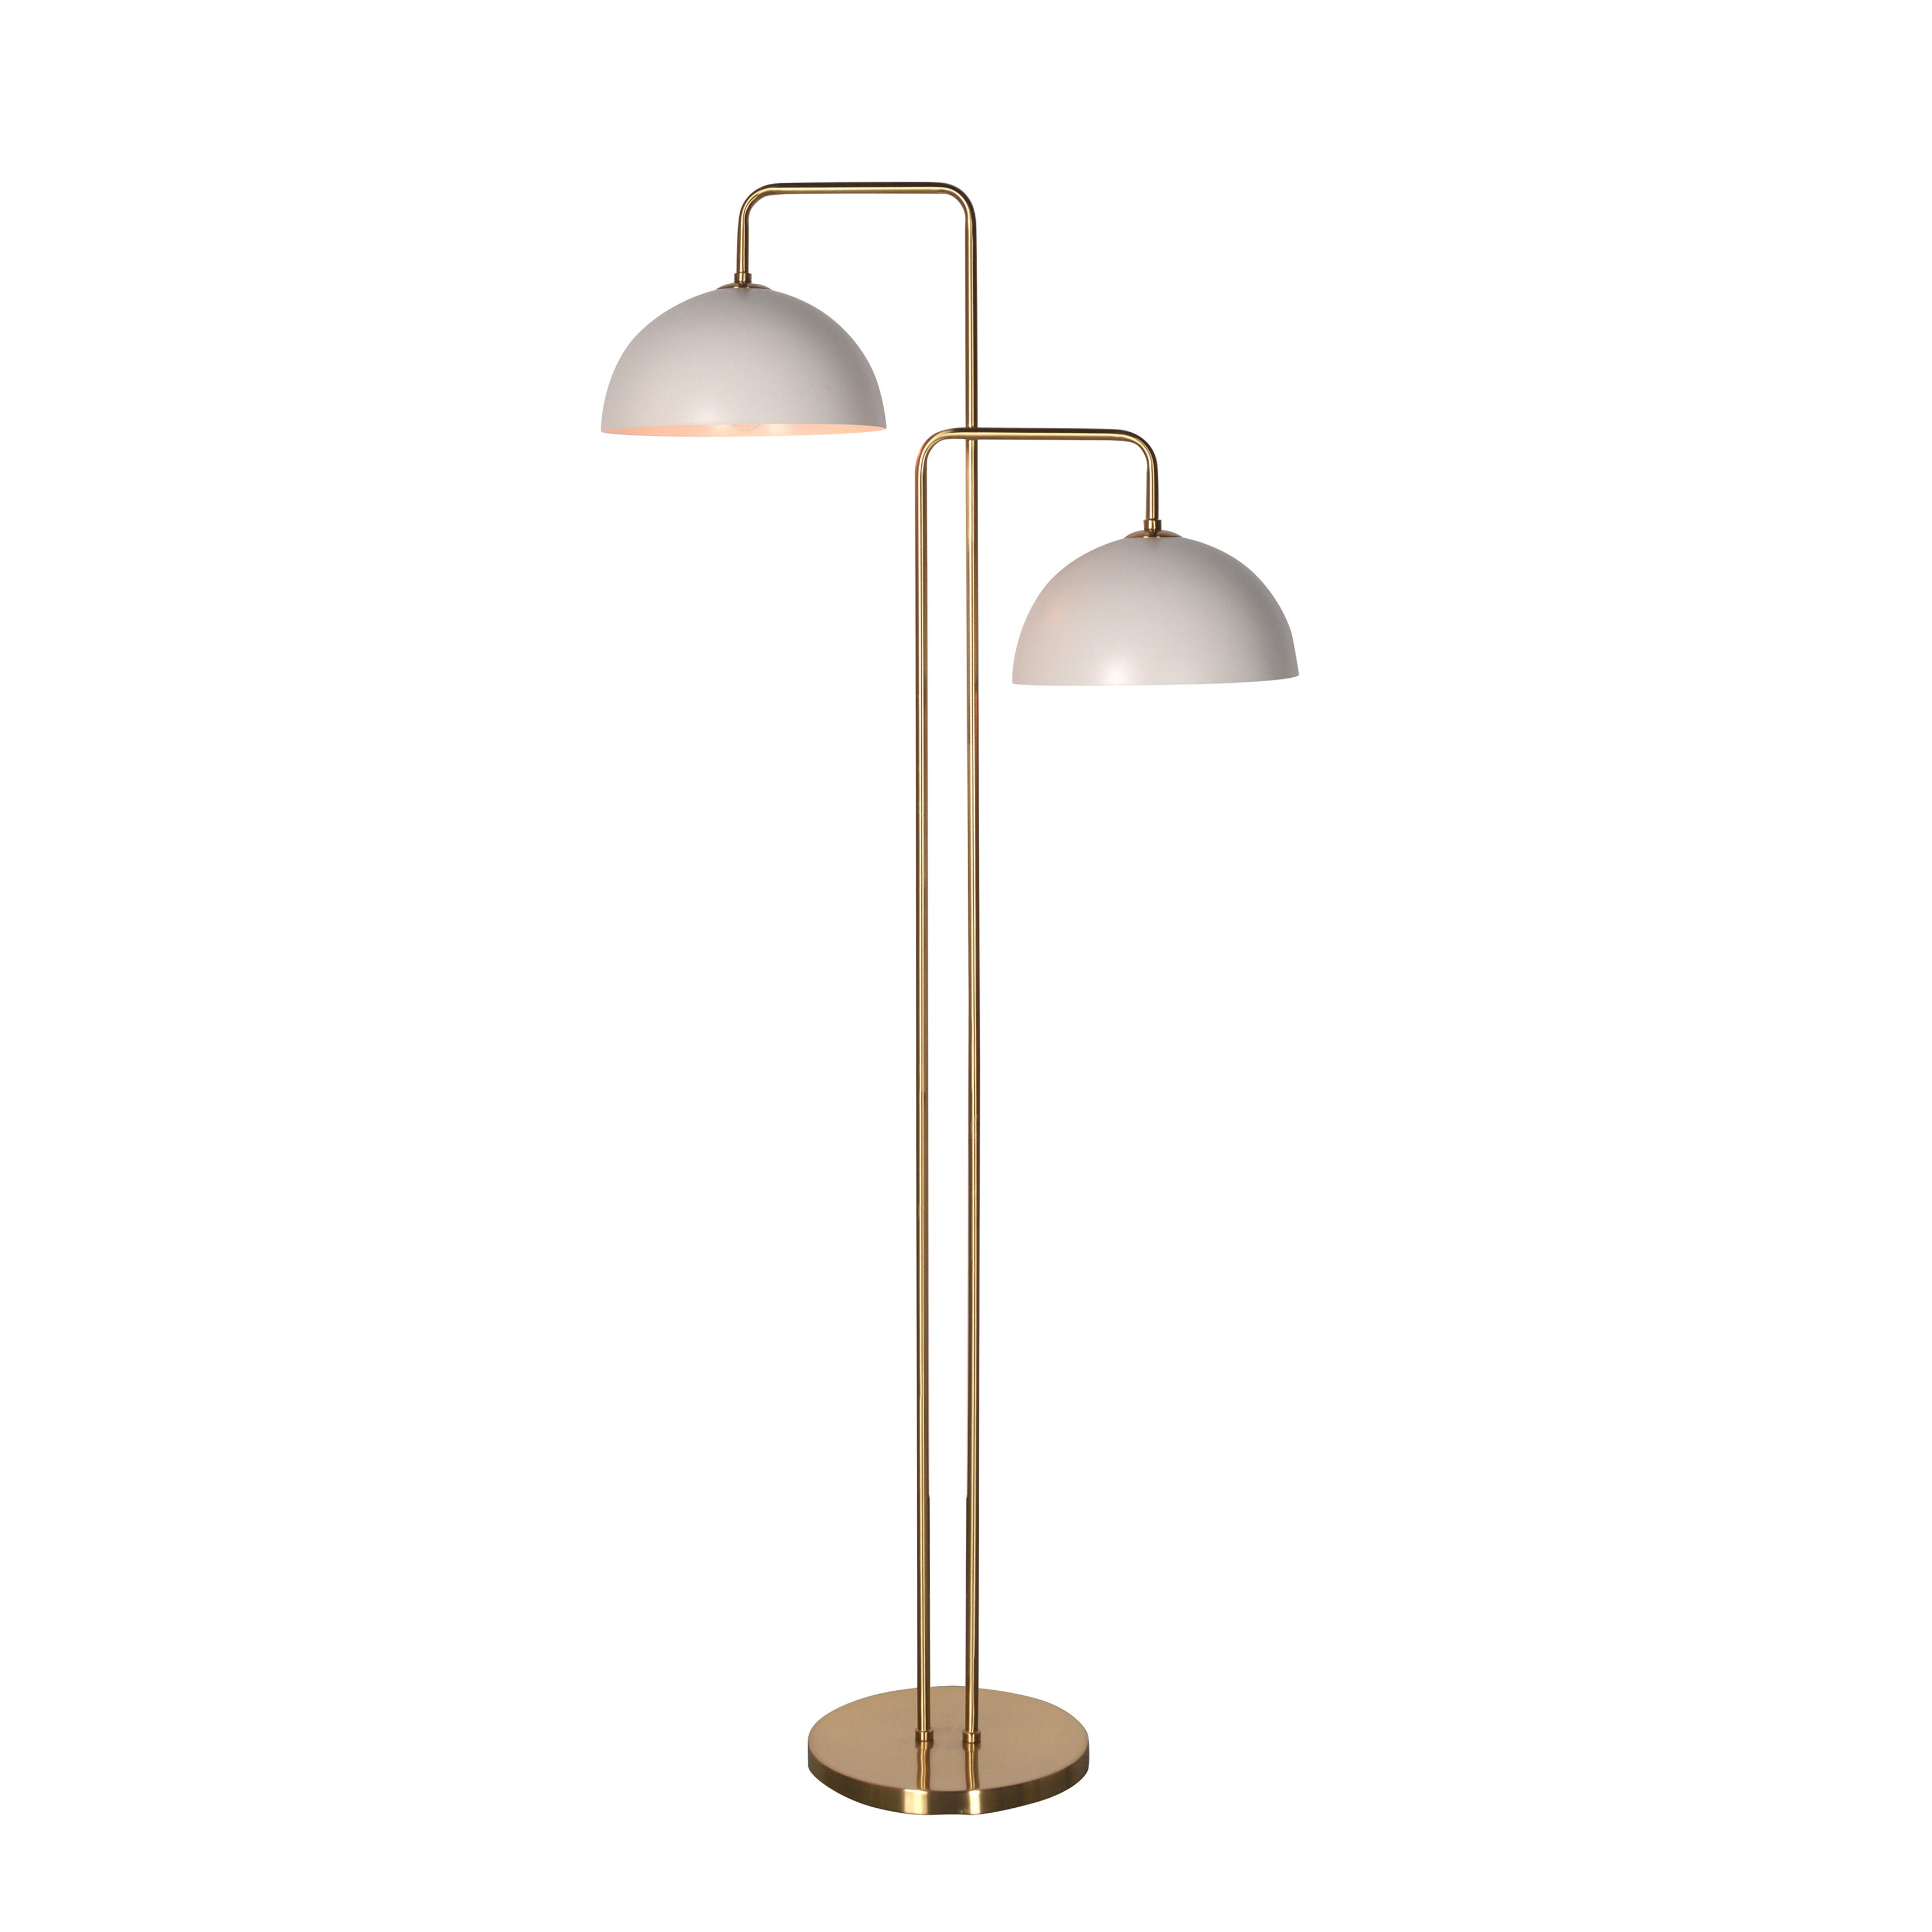 Upgrade your lighting with this simple yet elegant floor lamp. Featuring a delicately slim-brass iron frame and a set of lampshades in a stunning white finish. This minimalistic floor lamp achieves a versatile design that can be incorporated into a variety of interiors.Depth : 12 in Amethyst Home provides interior design, new home construction design consulting, vintage area rugs, and lighting in the Newport Beach metro area.